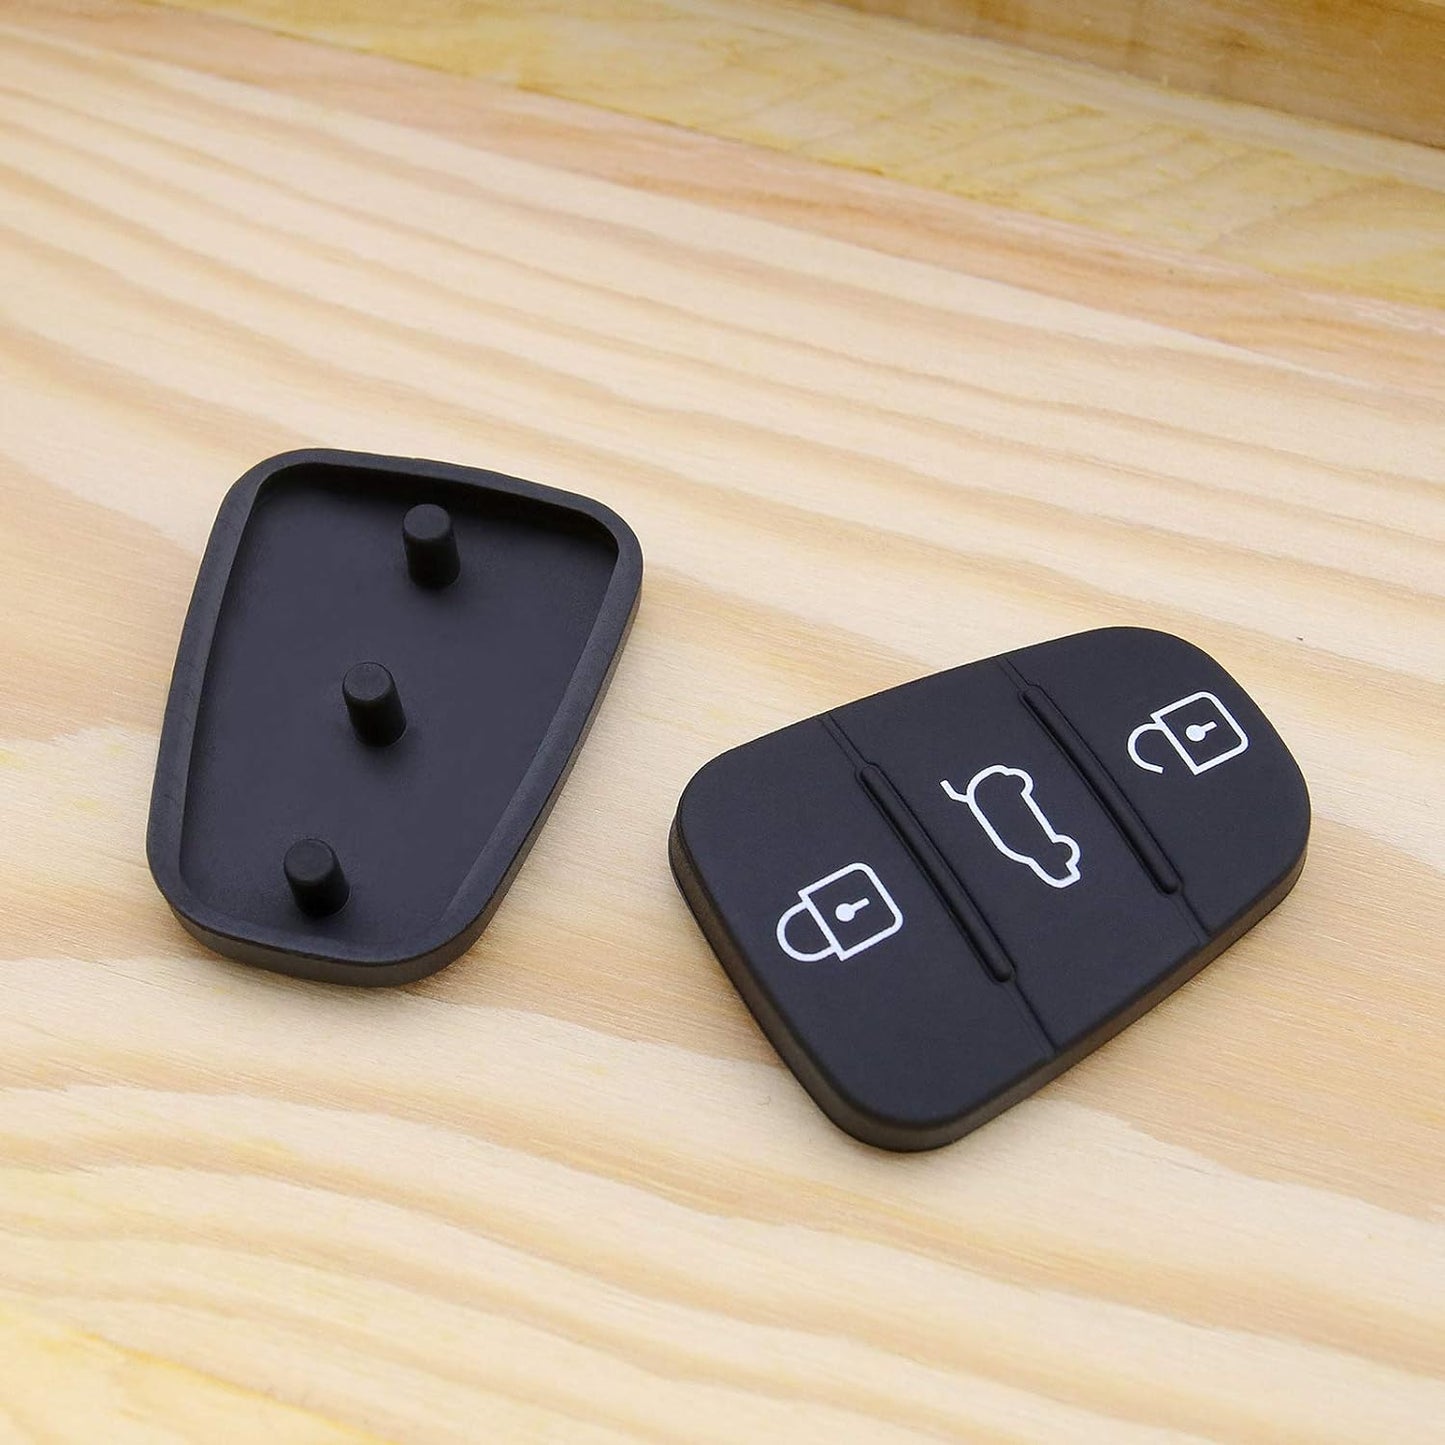 2 Pack 3-Button Auto Remote Key Fob Button Pads Rubber Black Insert Keypads for Car Key Shell Replacement Part